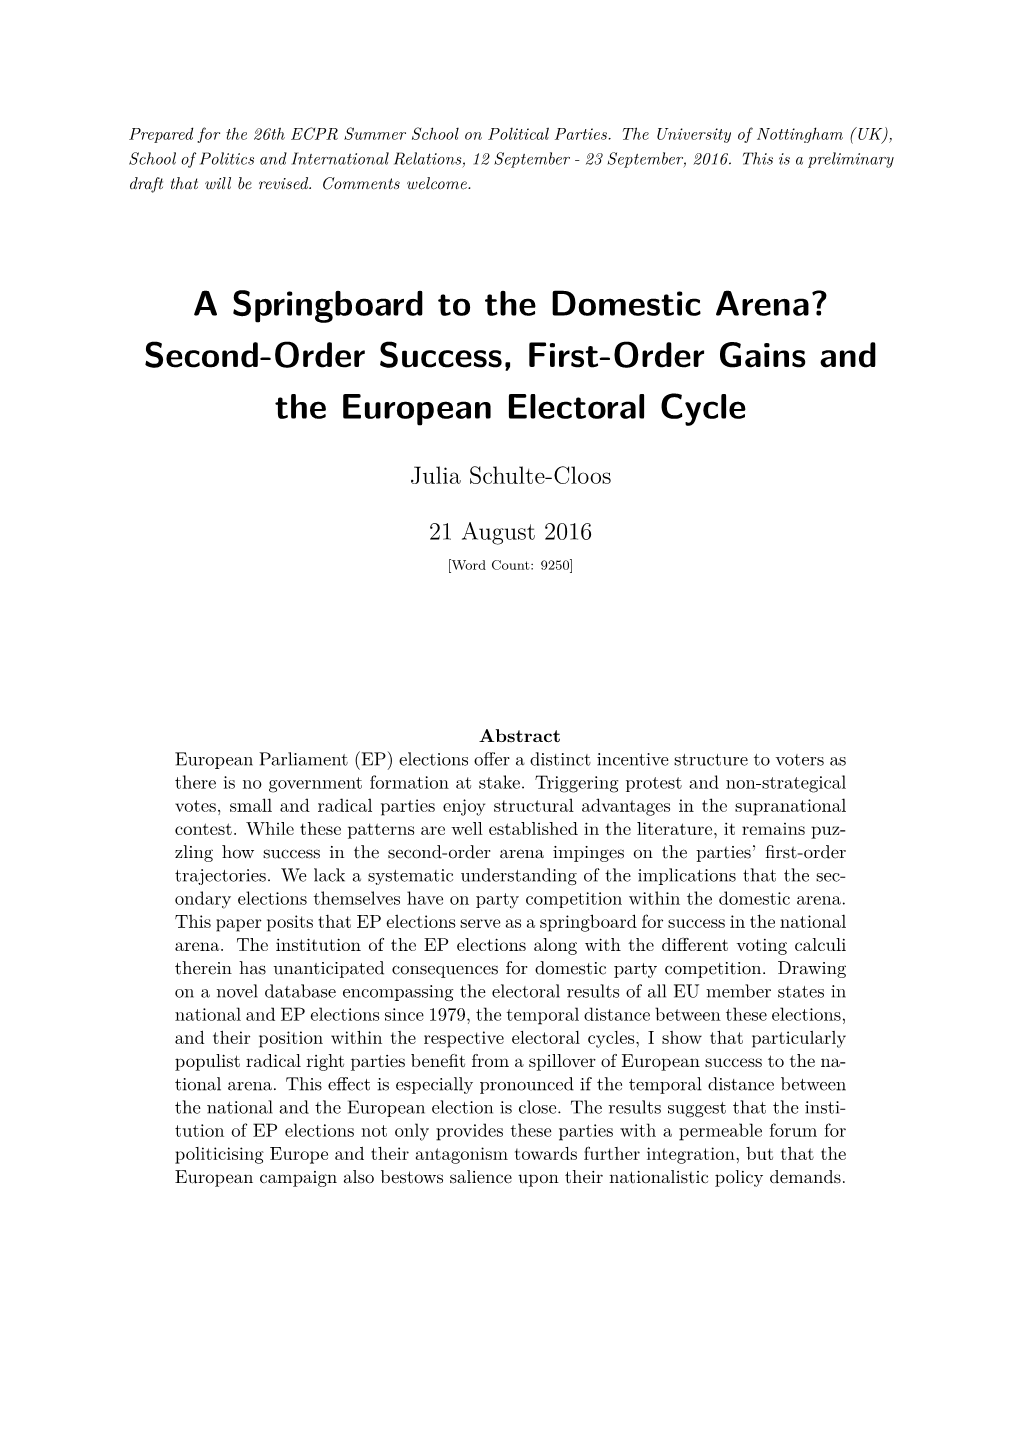 Second-Order Success, First-Order Gains and the European Electoral Cycle